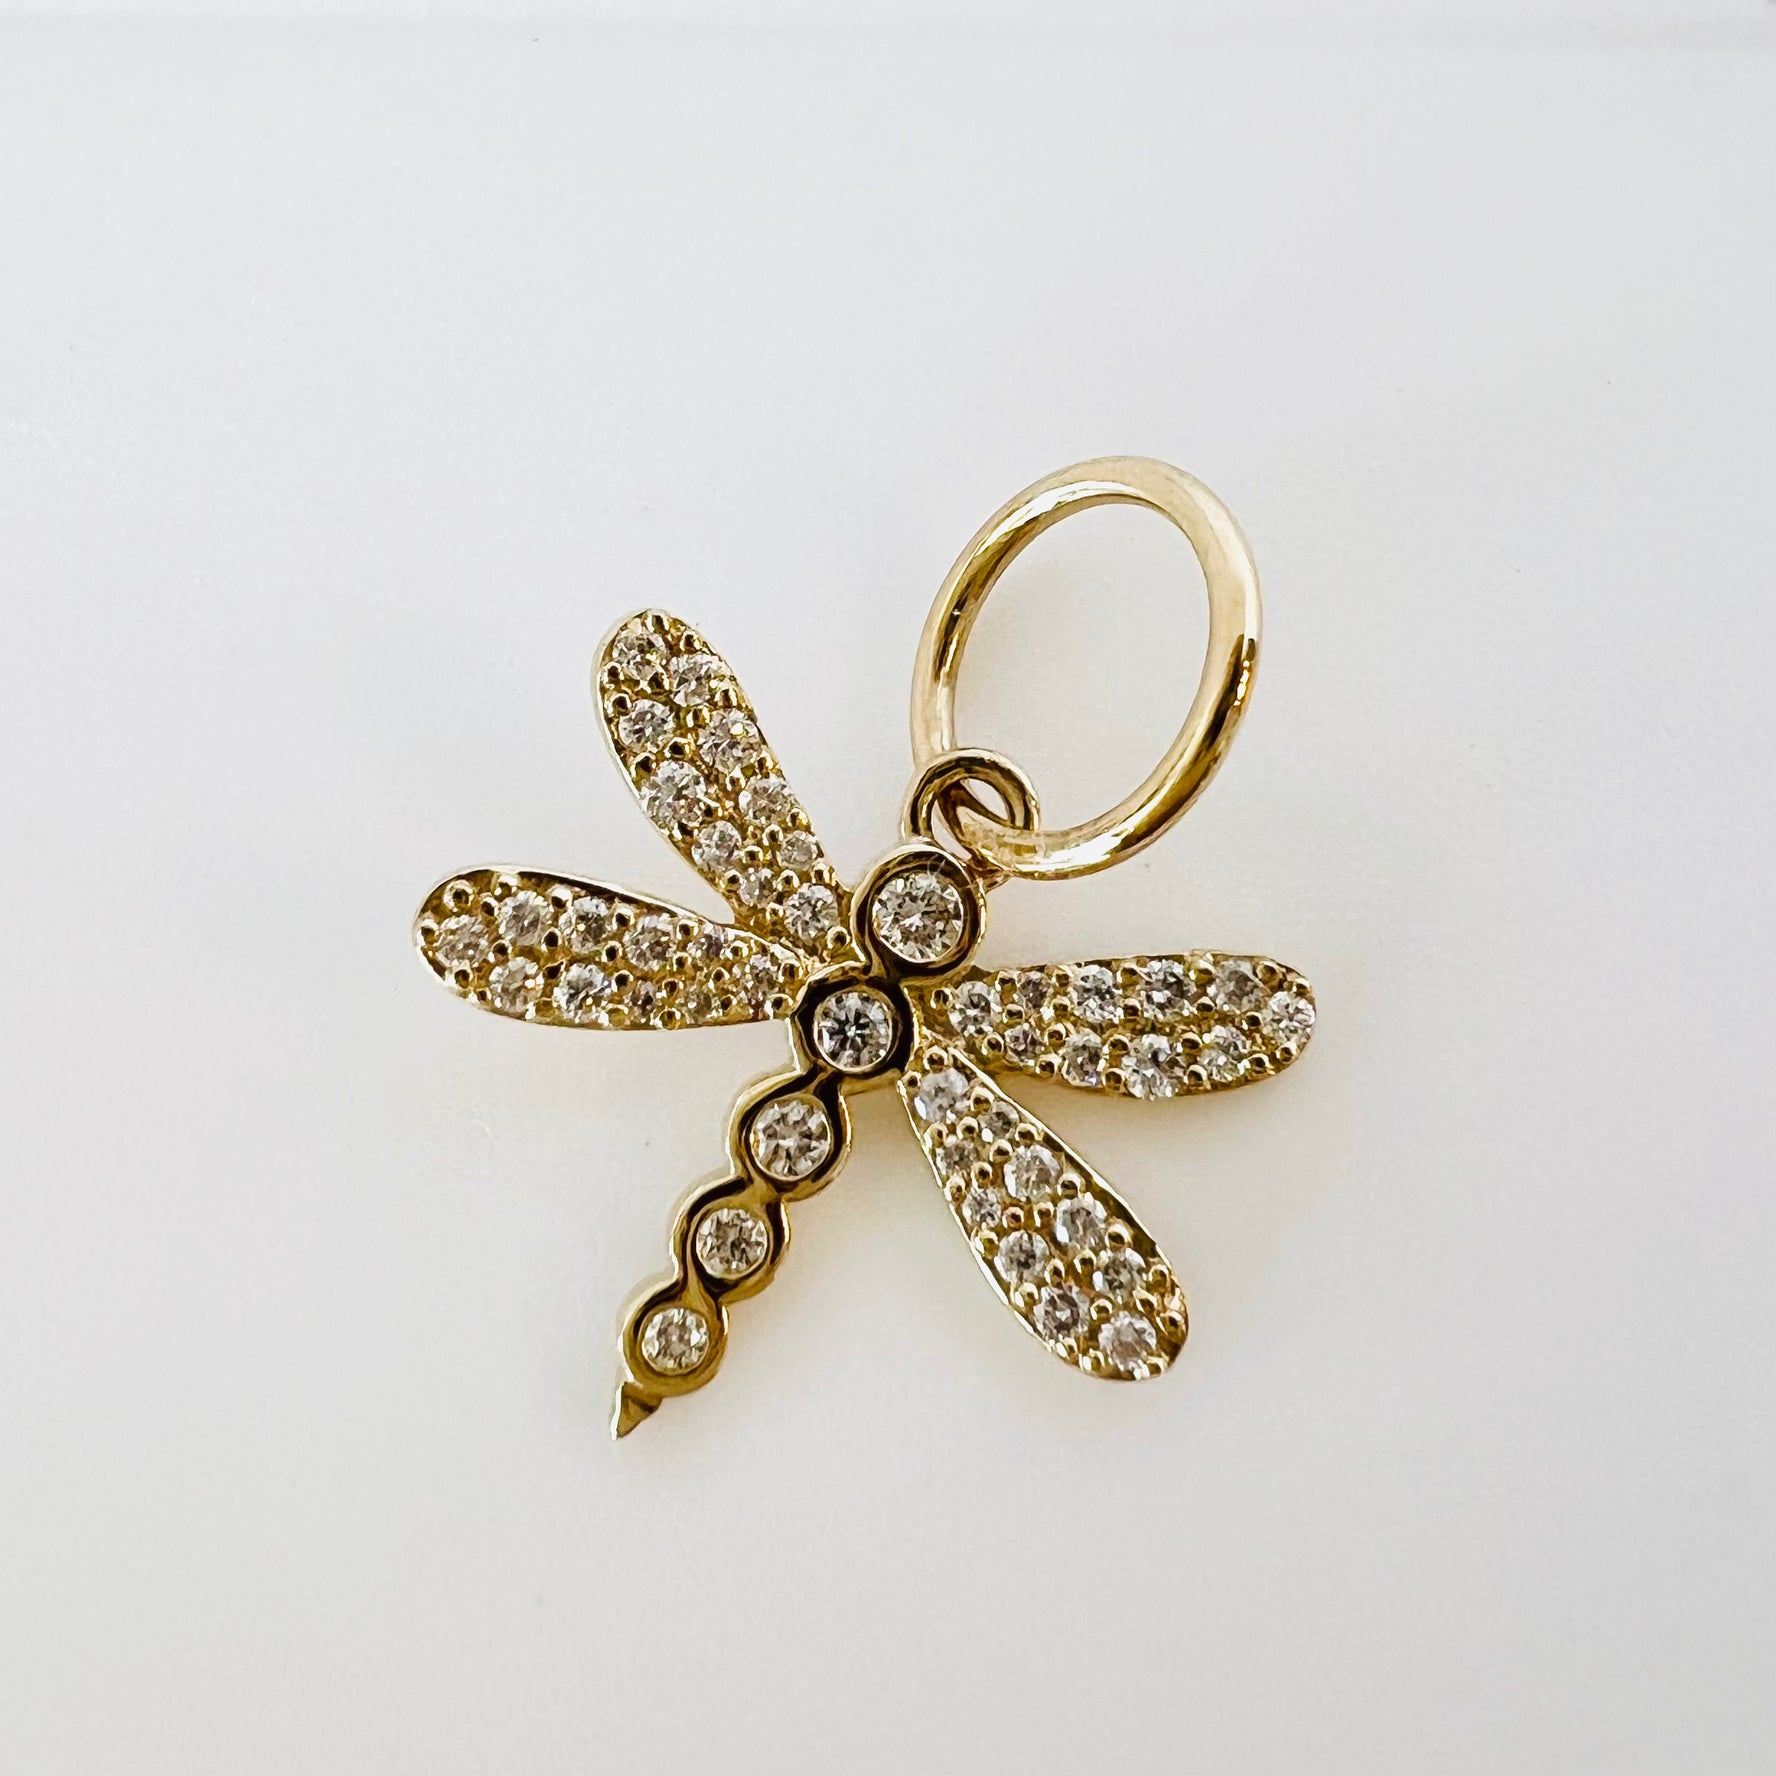 14k gold and diamond dragonfly pendant/ charm